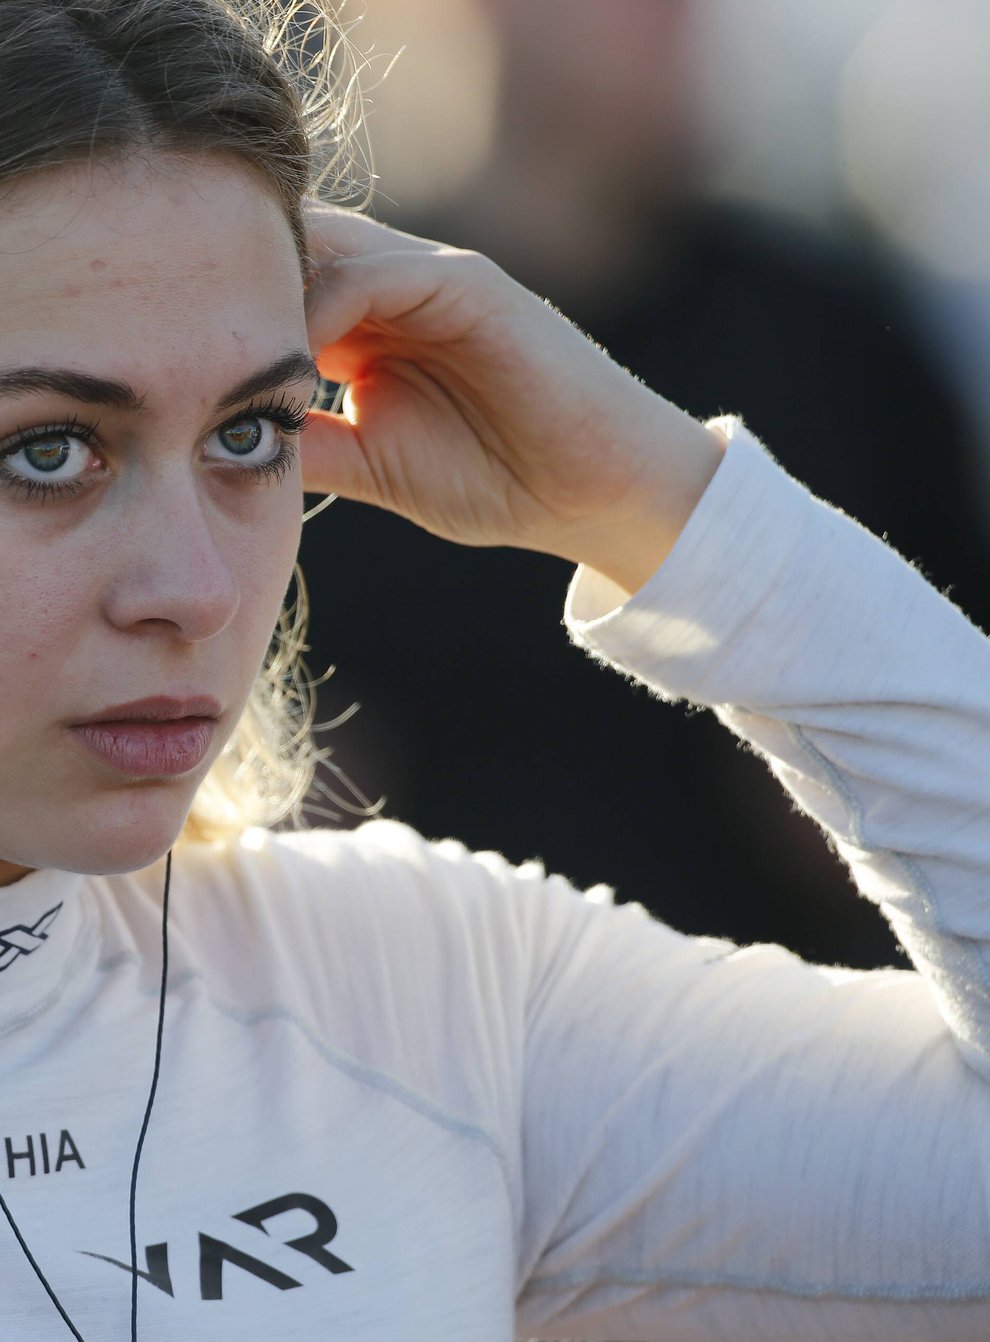 Florsch has made a name for herself at a very young age in motorsport (PA Images)